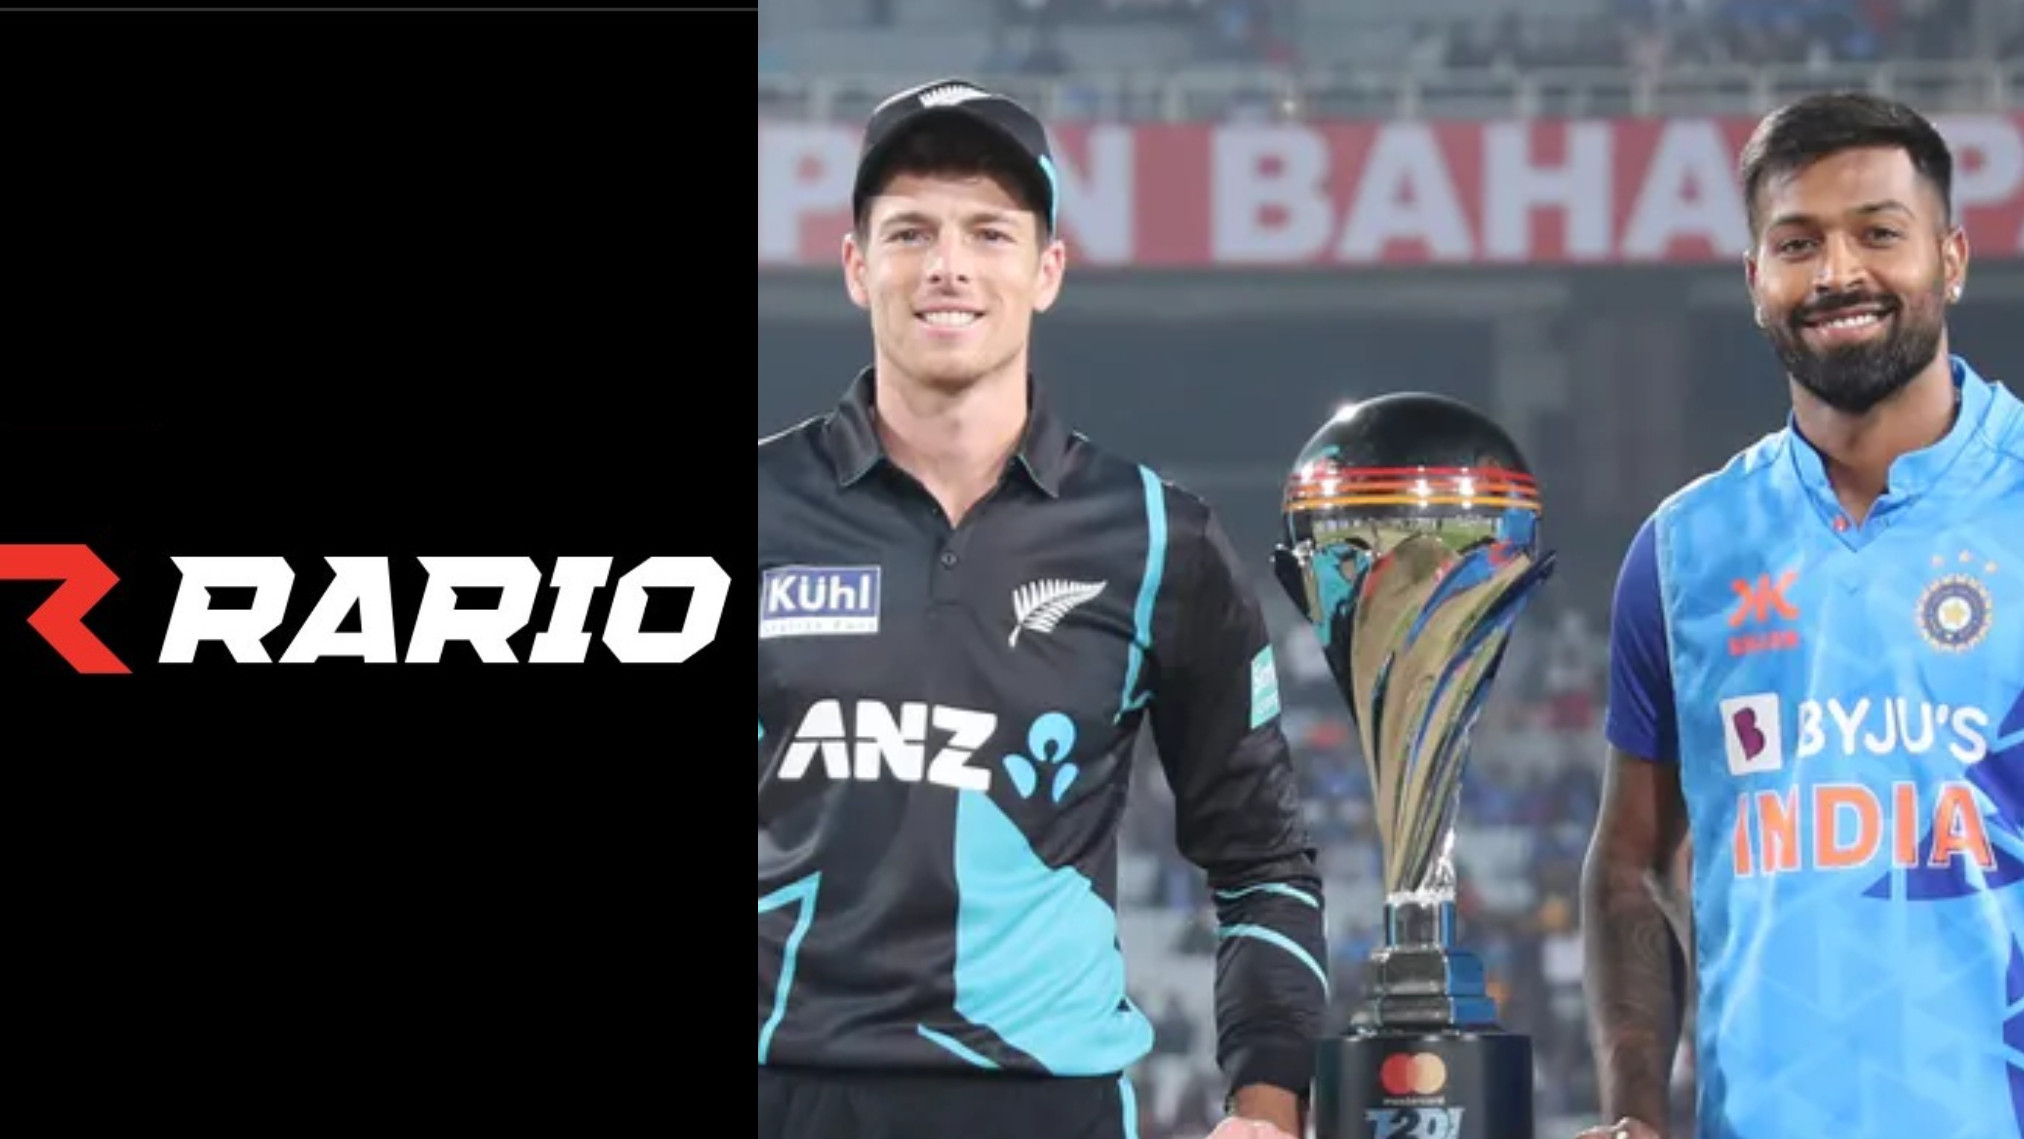 Rario D3 Predictions: Grab exciting player cards for New Zealand's tour of India 2023, play for great prizes